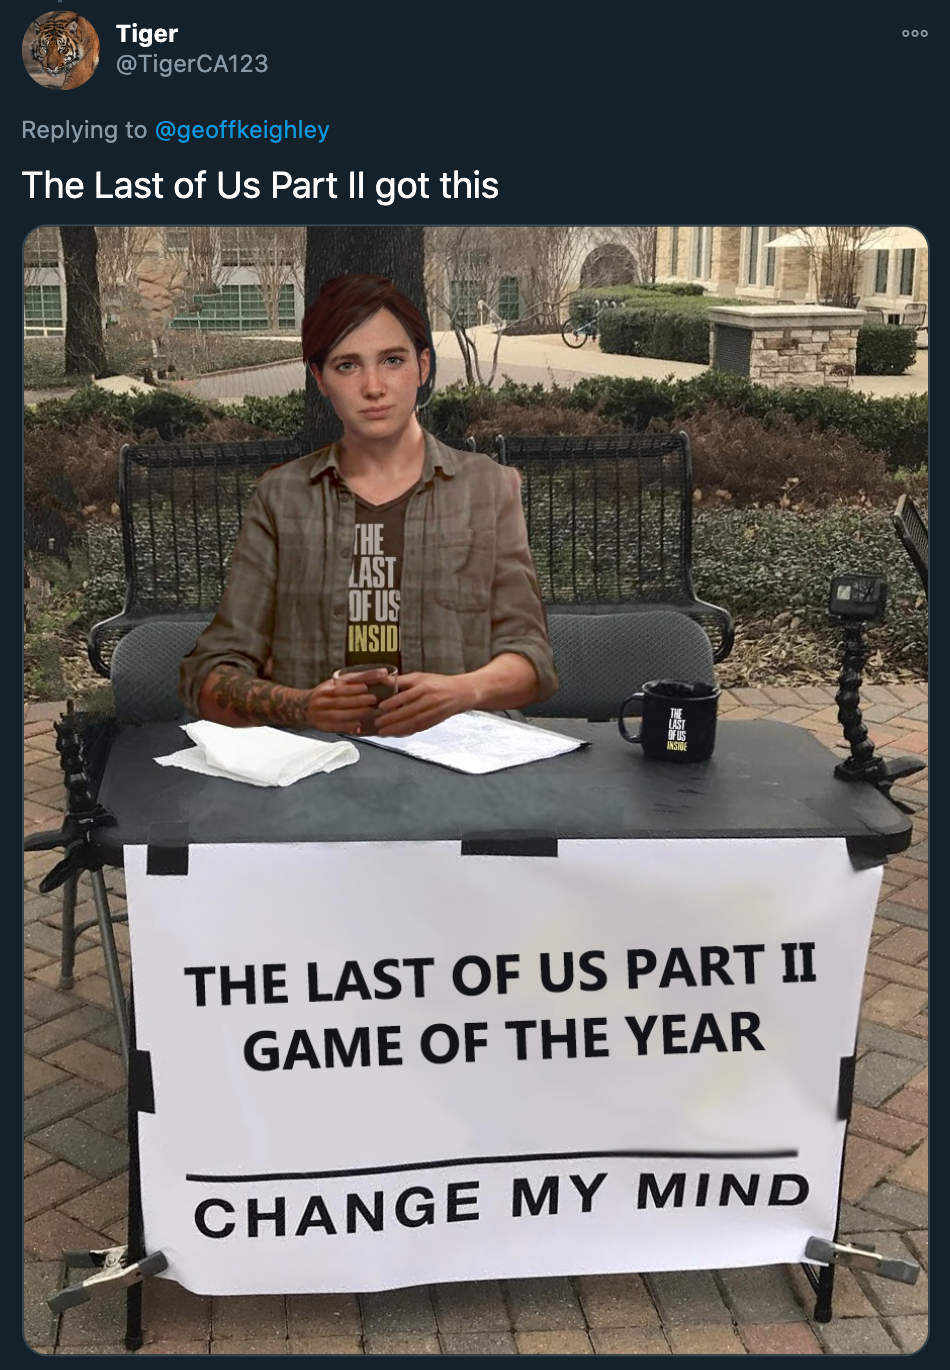 game of the year awards 2020 - The Last of Us Part II got this